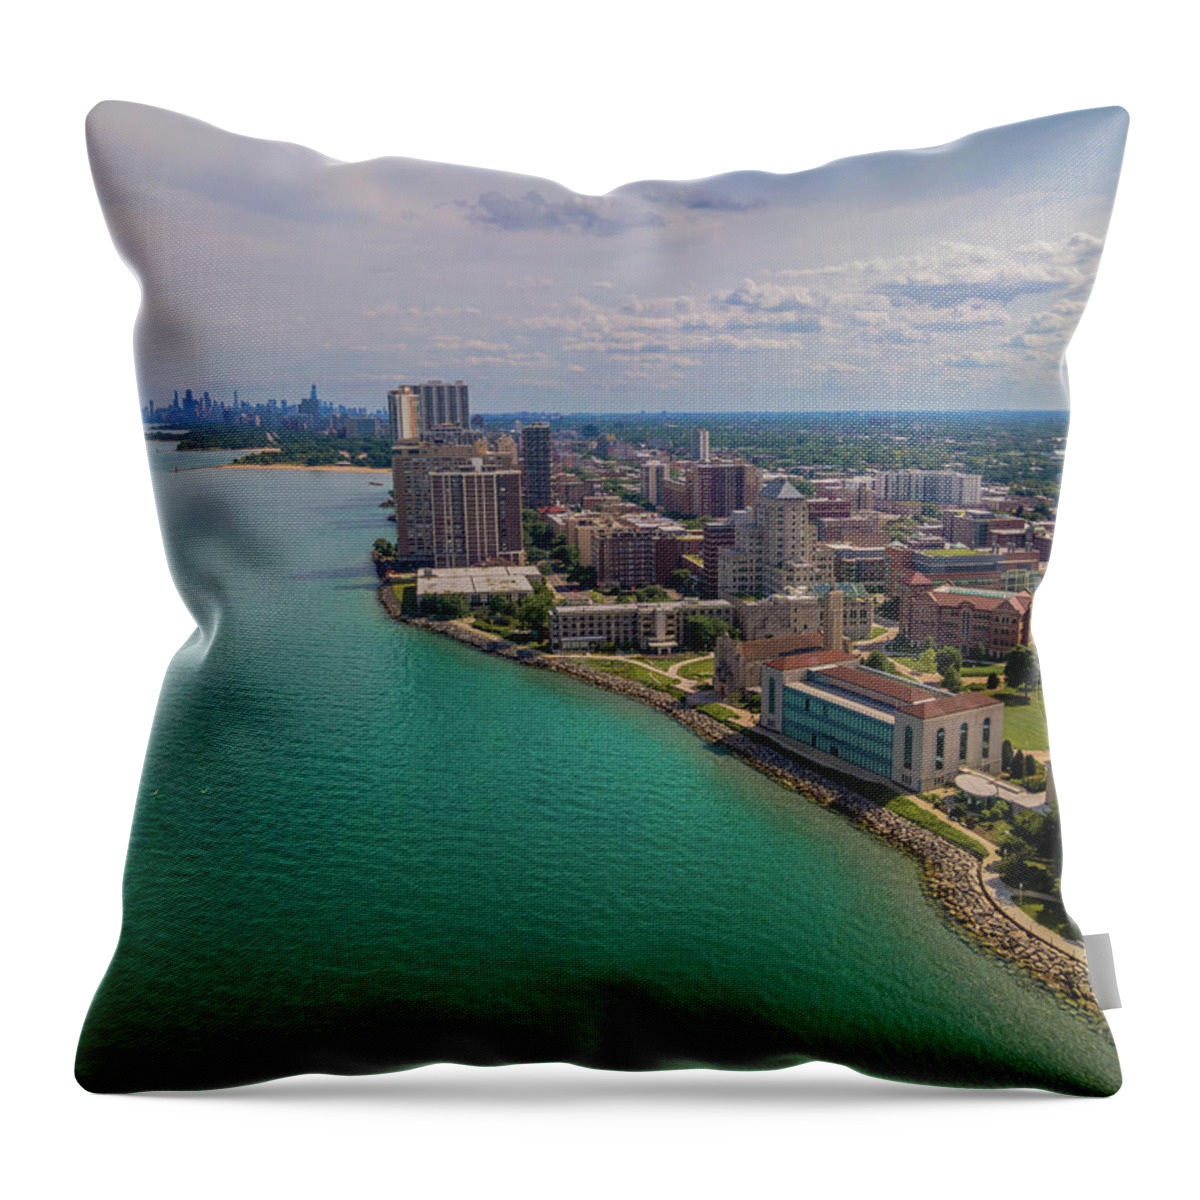 Chicago Throw Pillow featuring the photograph Loyola University Chicago by Bobby K